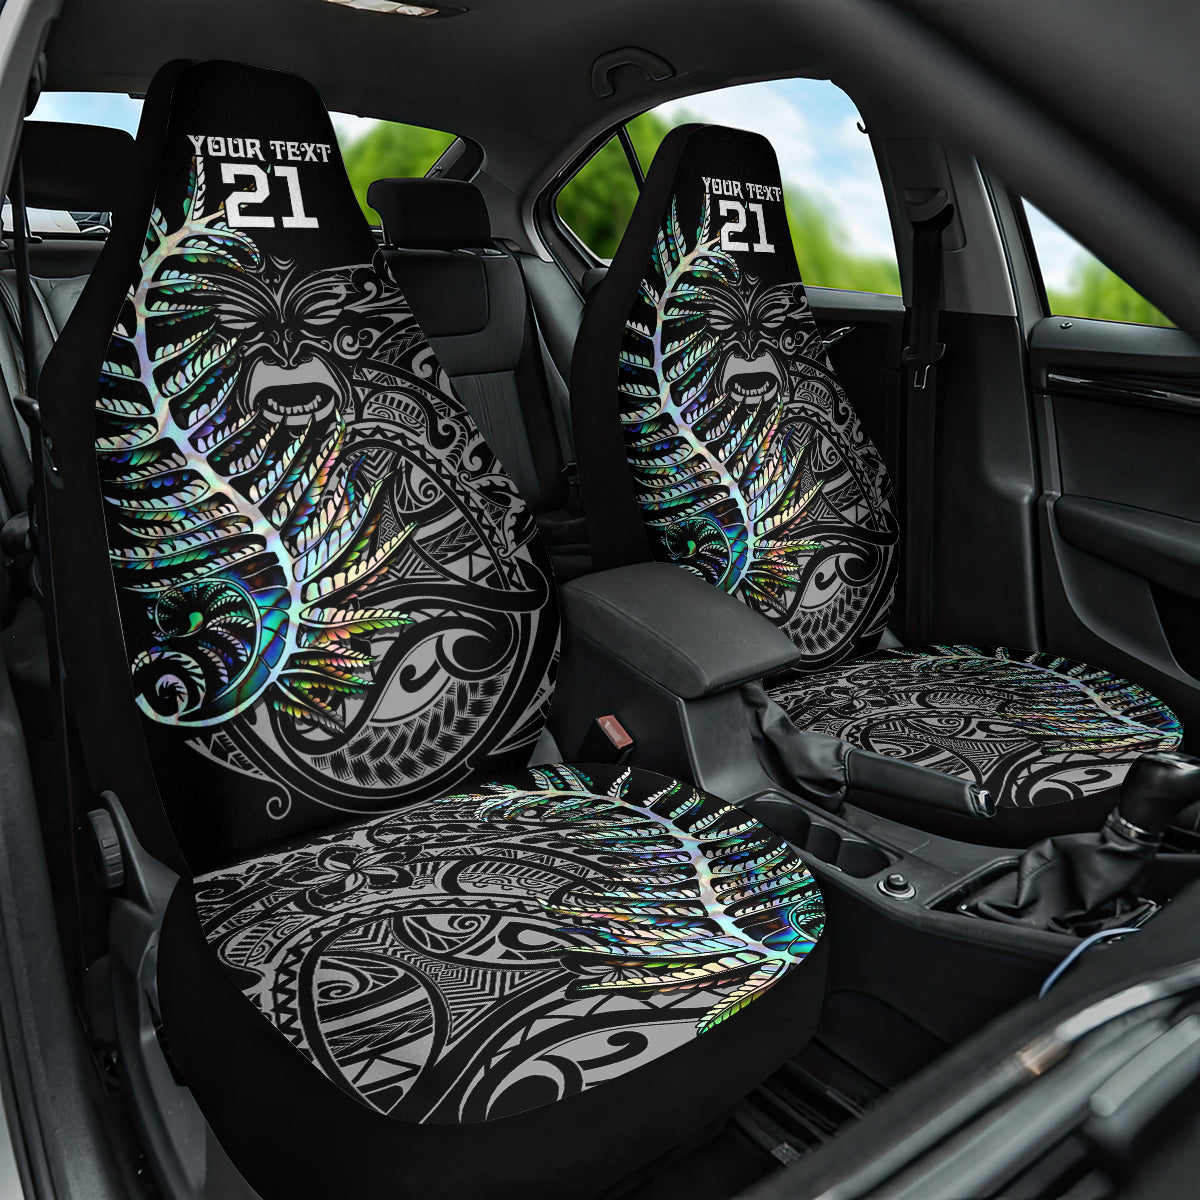 Custom New Zealand Rugby Car Seat Cover NZ Black Fern Champions History With Papua Shell LT9 One Size Black - Polynesian Pride